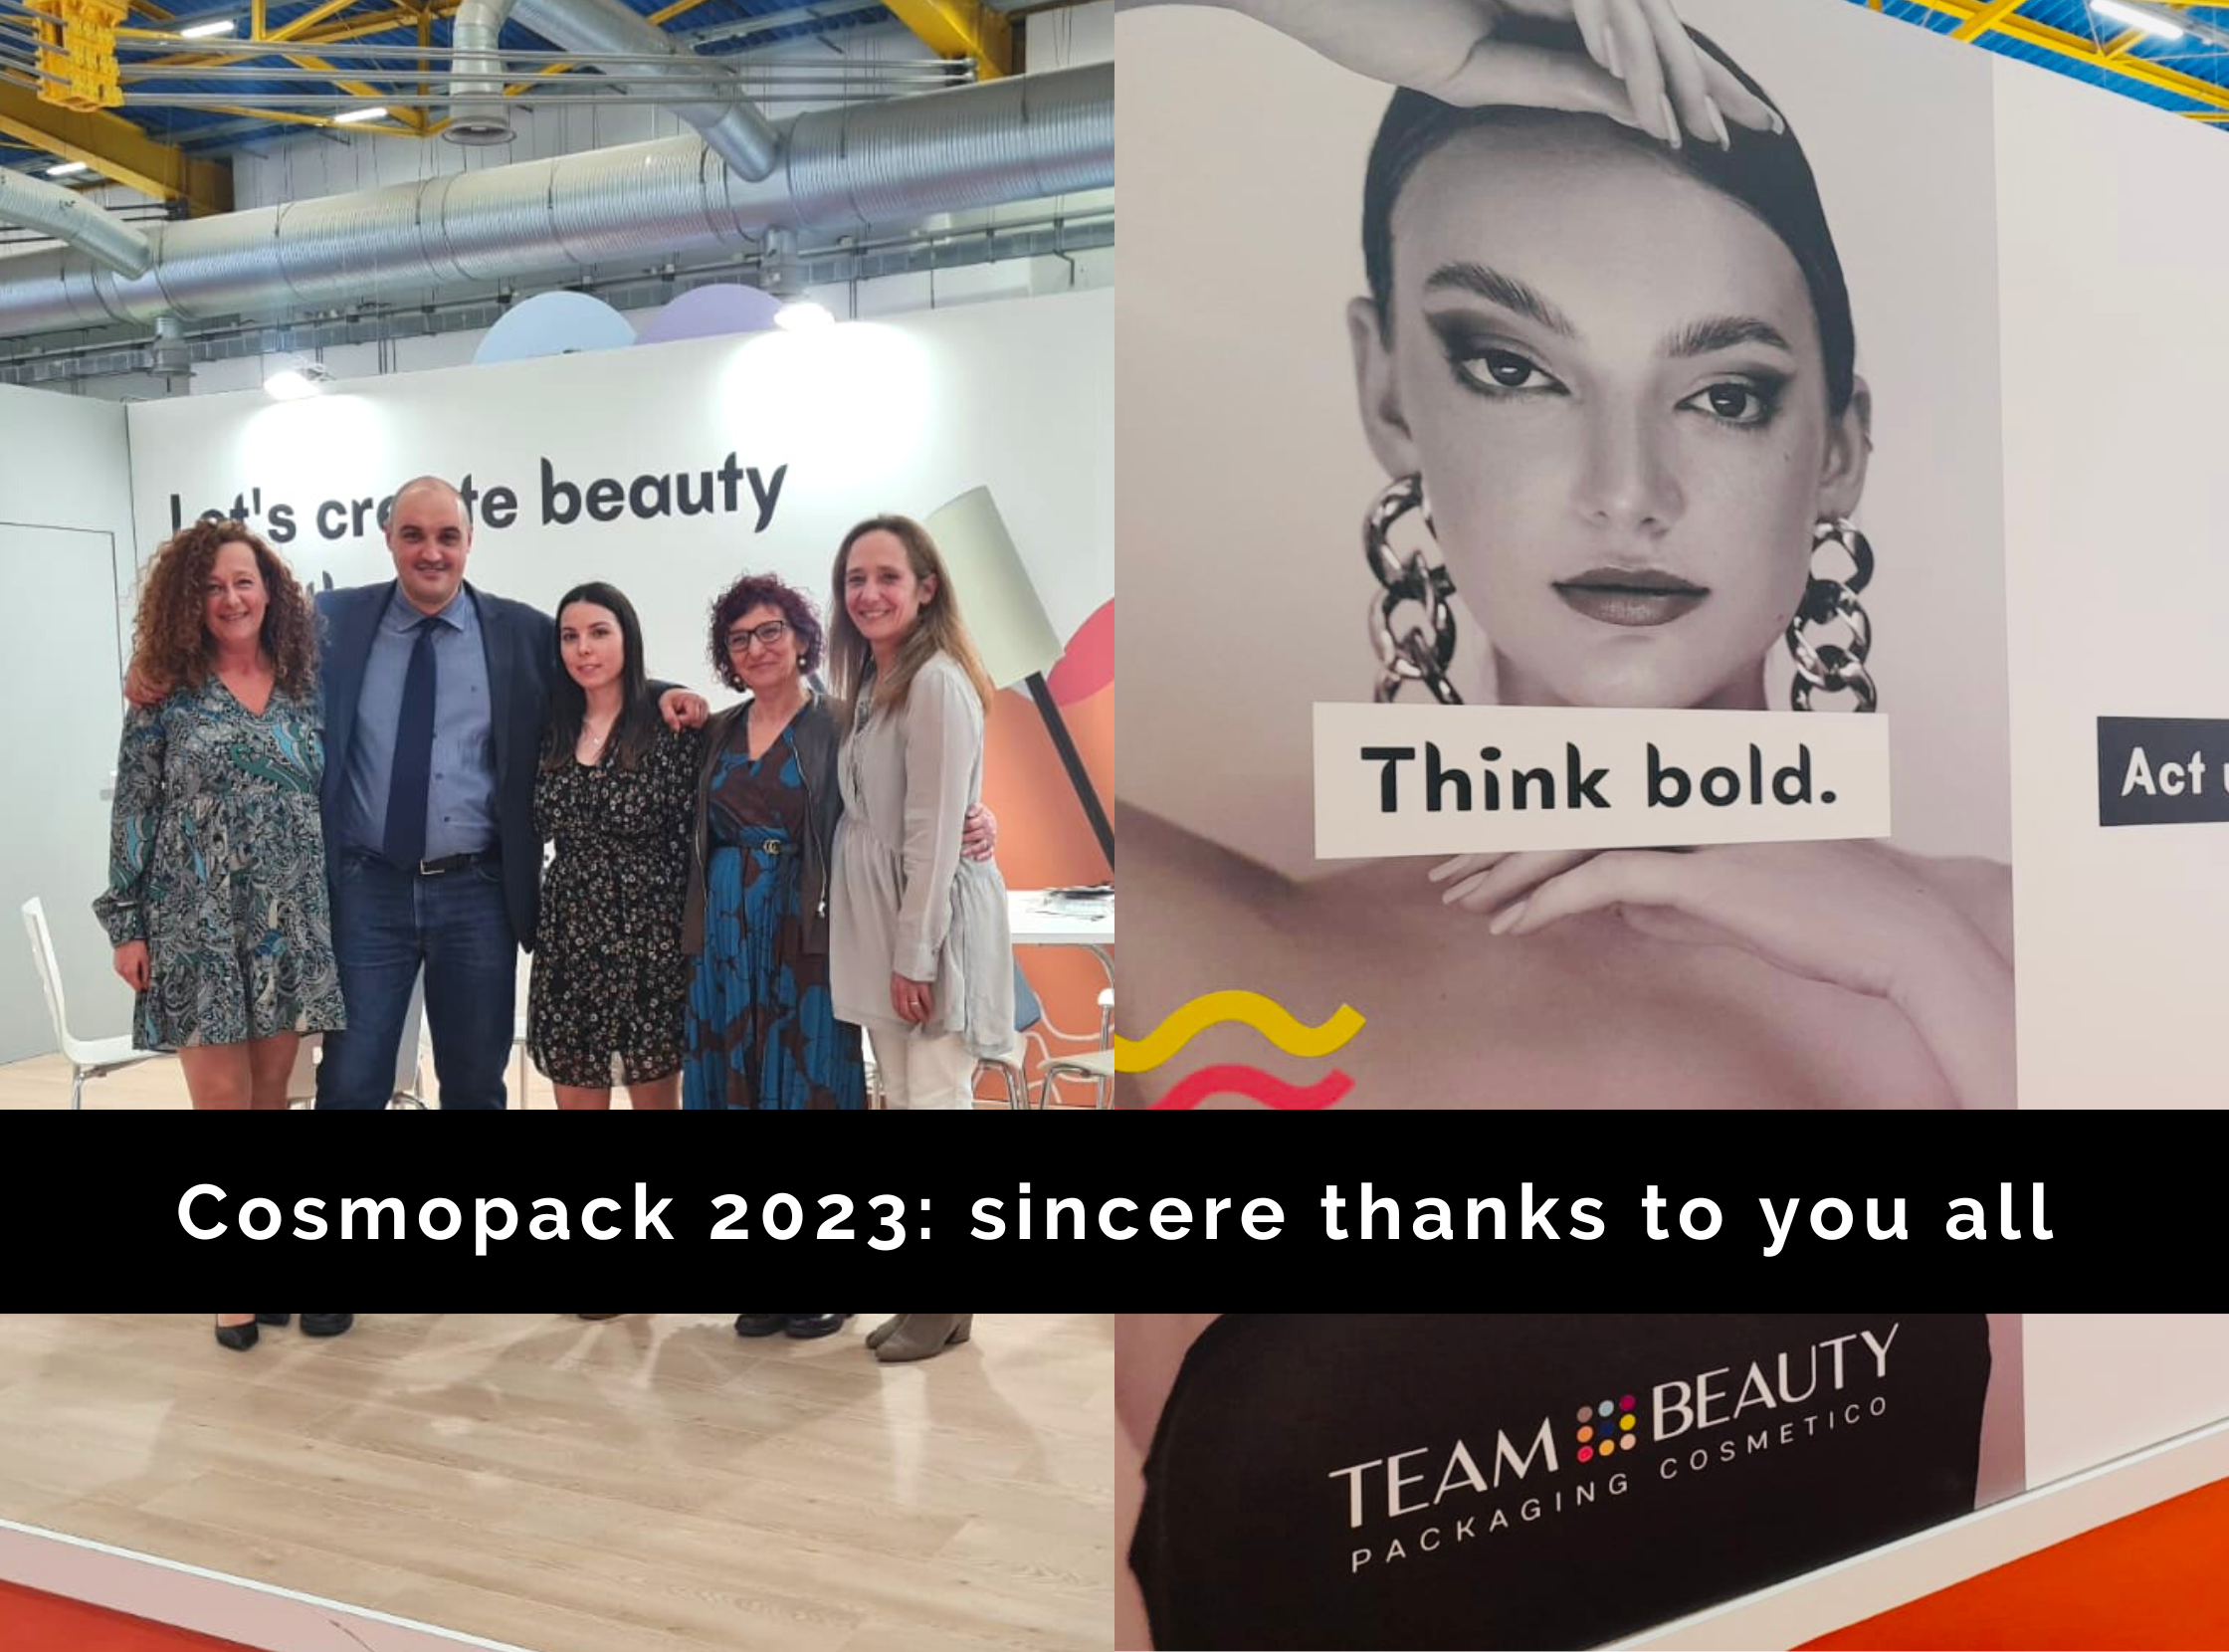 Cosmopack 2023: sincere thanks to all of you